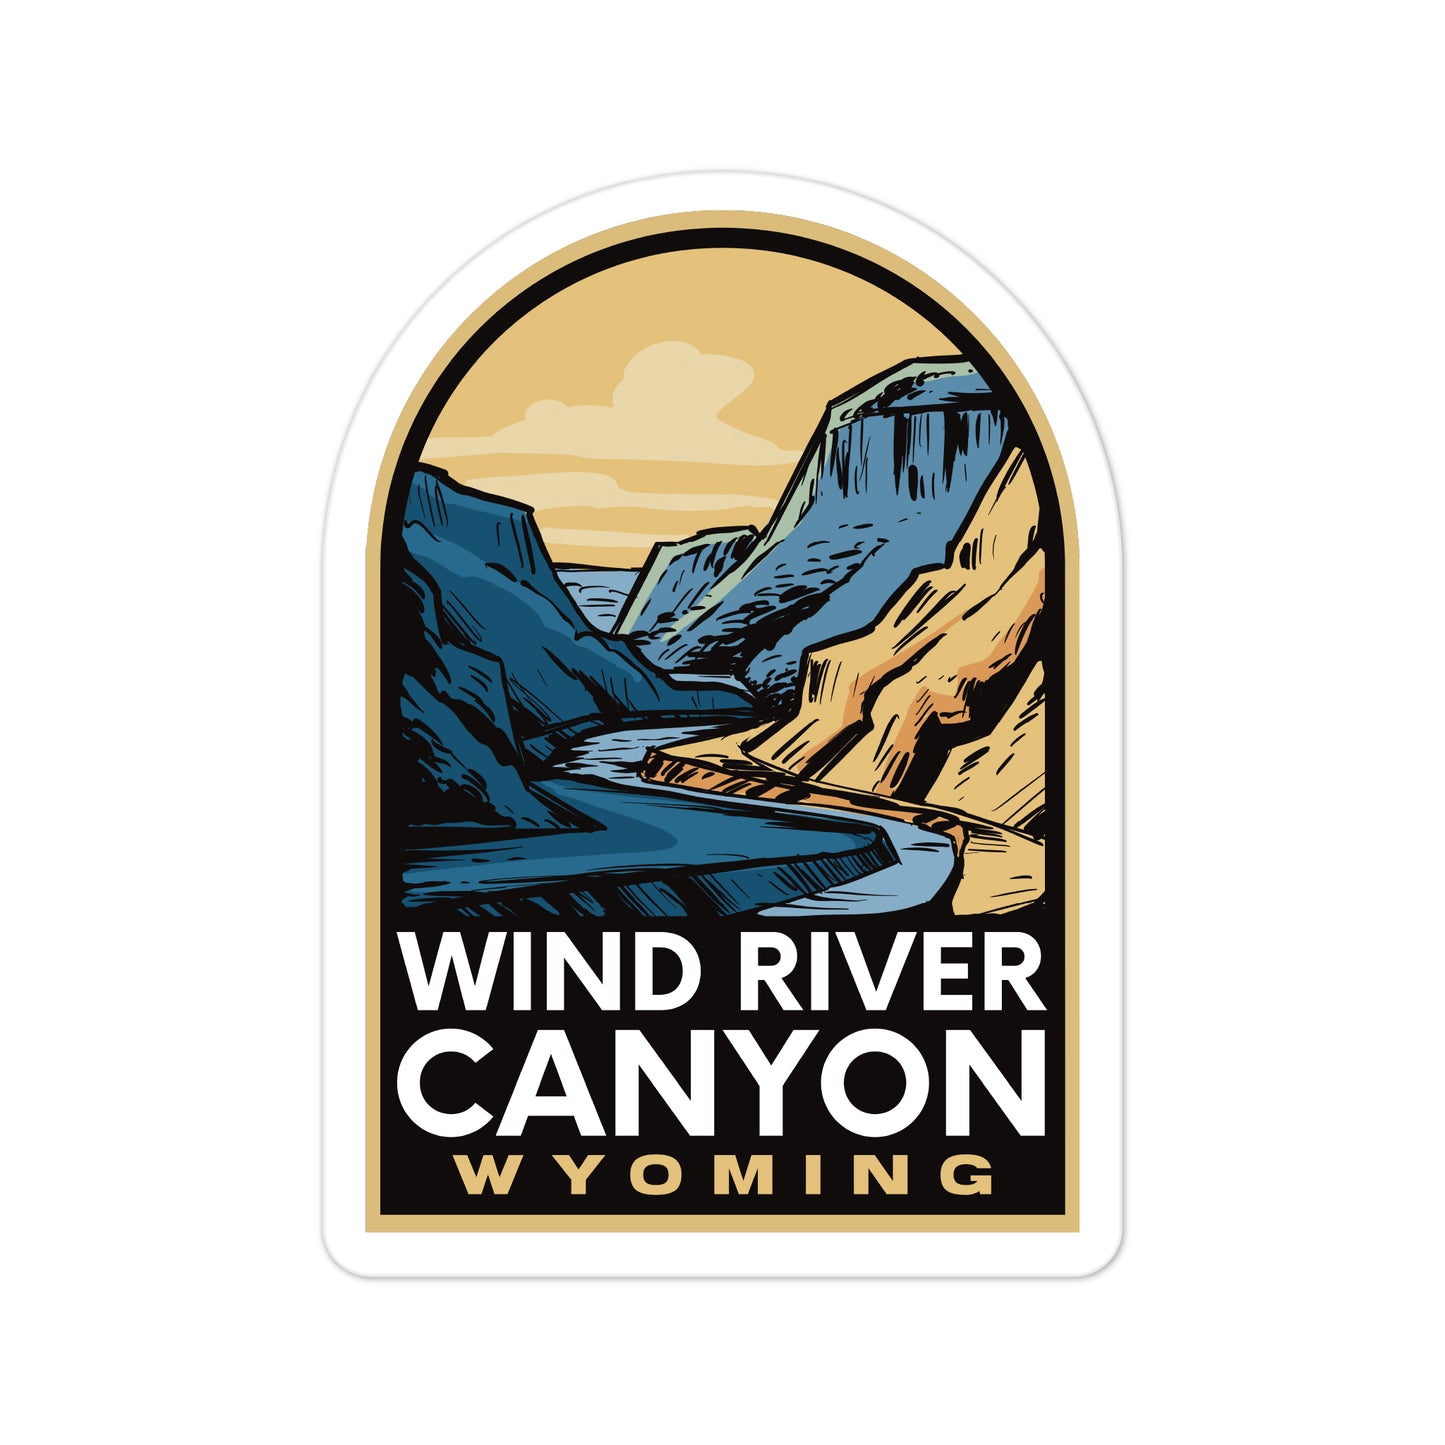 A sticker of Wind River Canyon